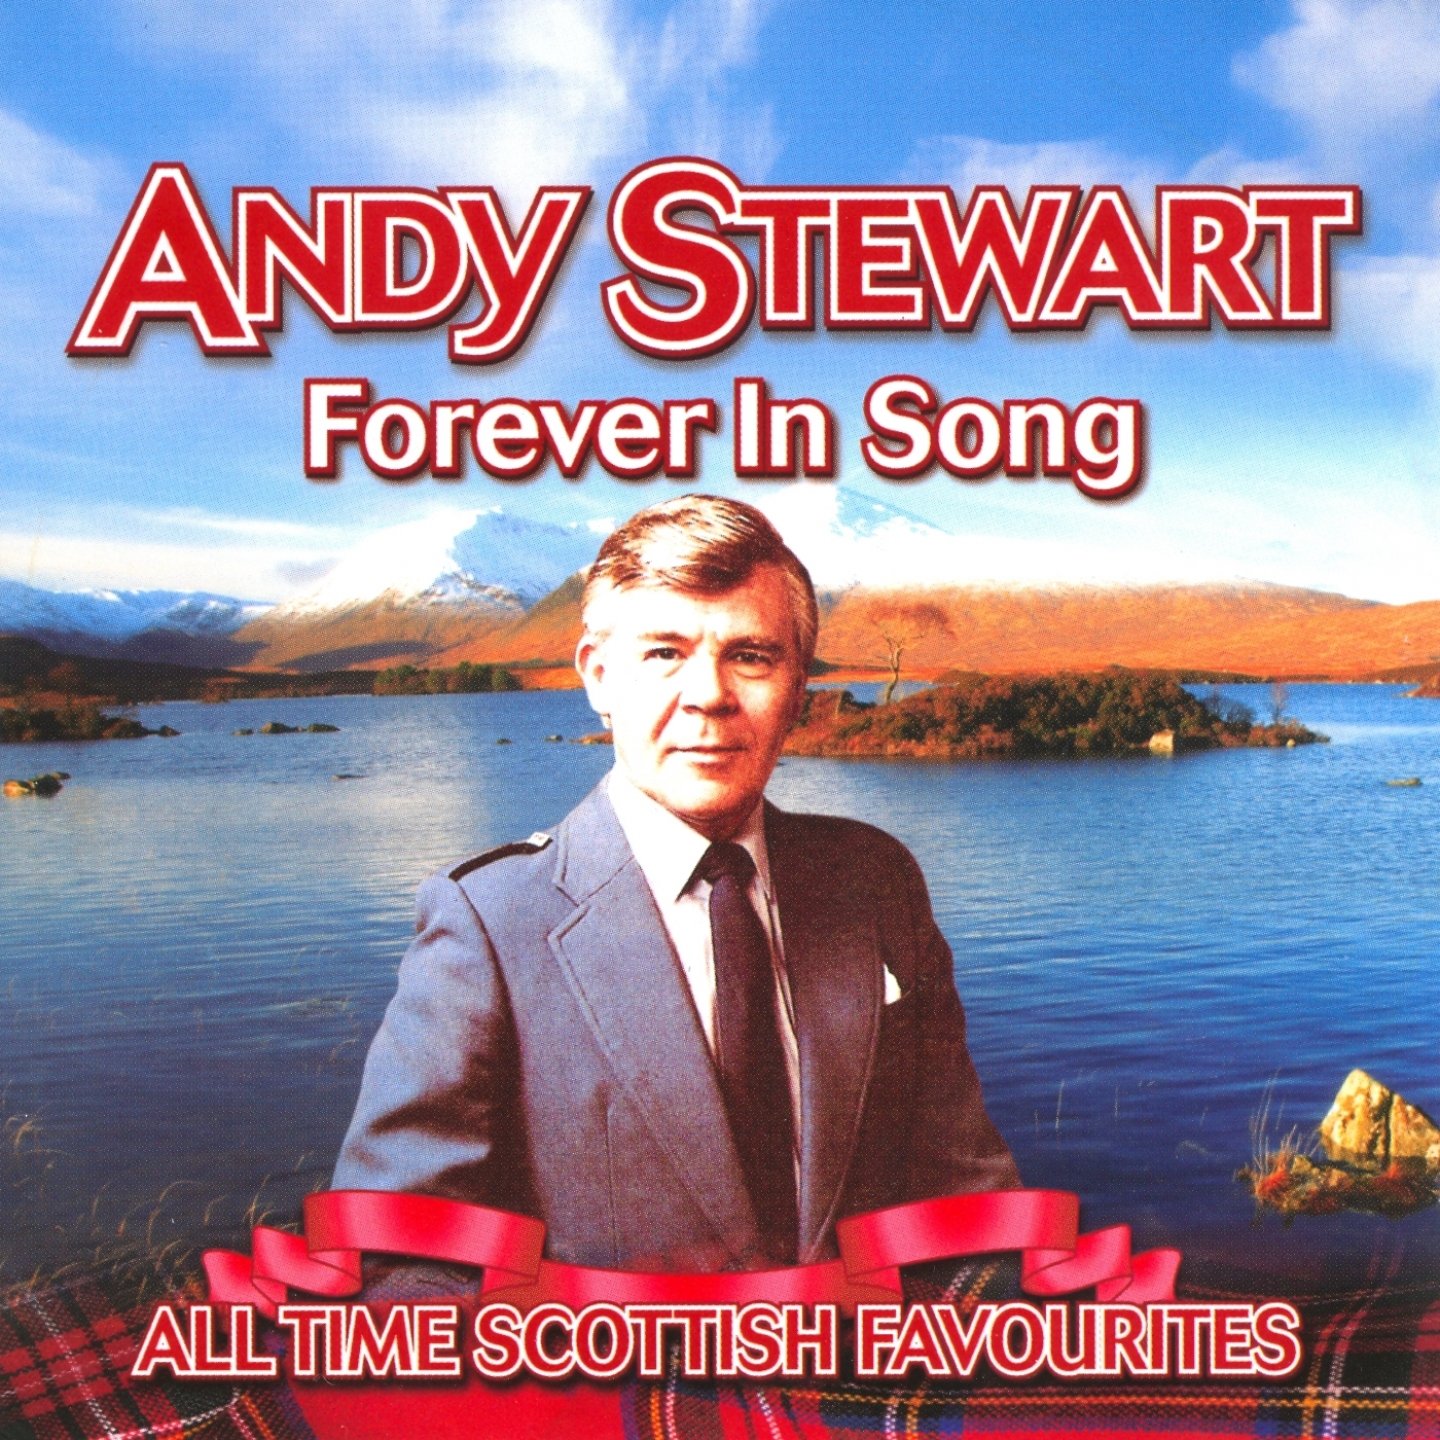 Andy Stewart — Auld Lang Syne — Listen, watch, download and discover music for free at Last.fm